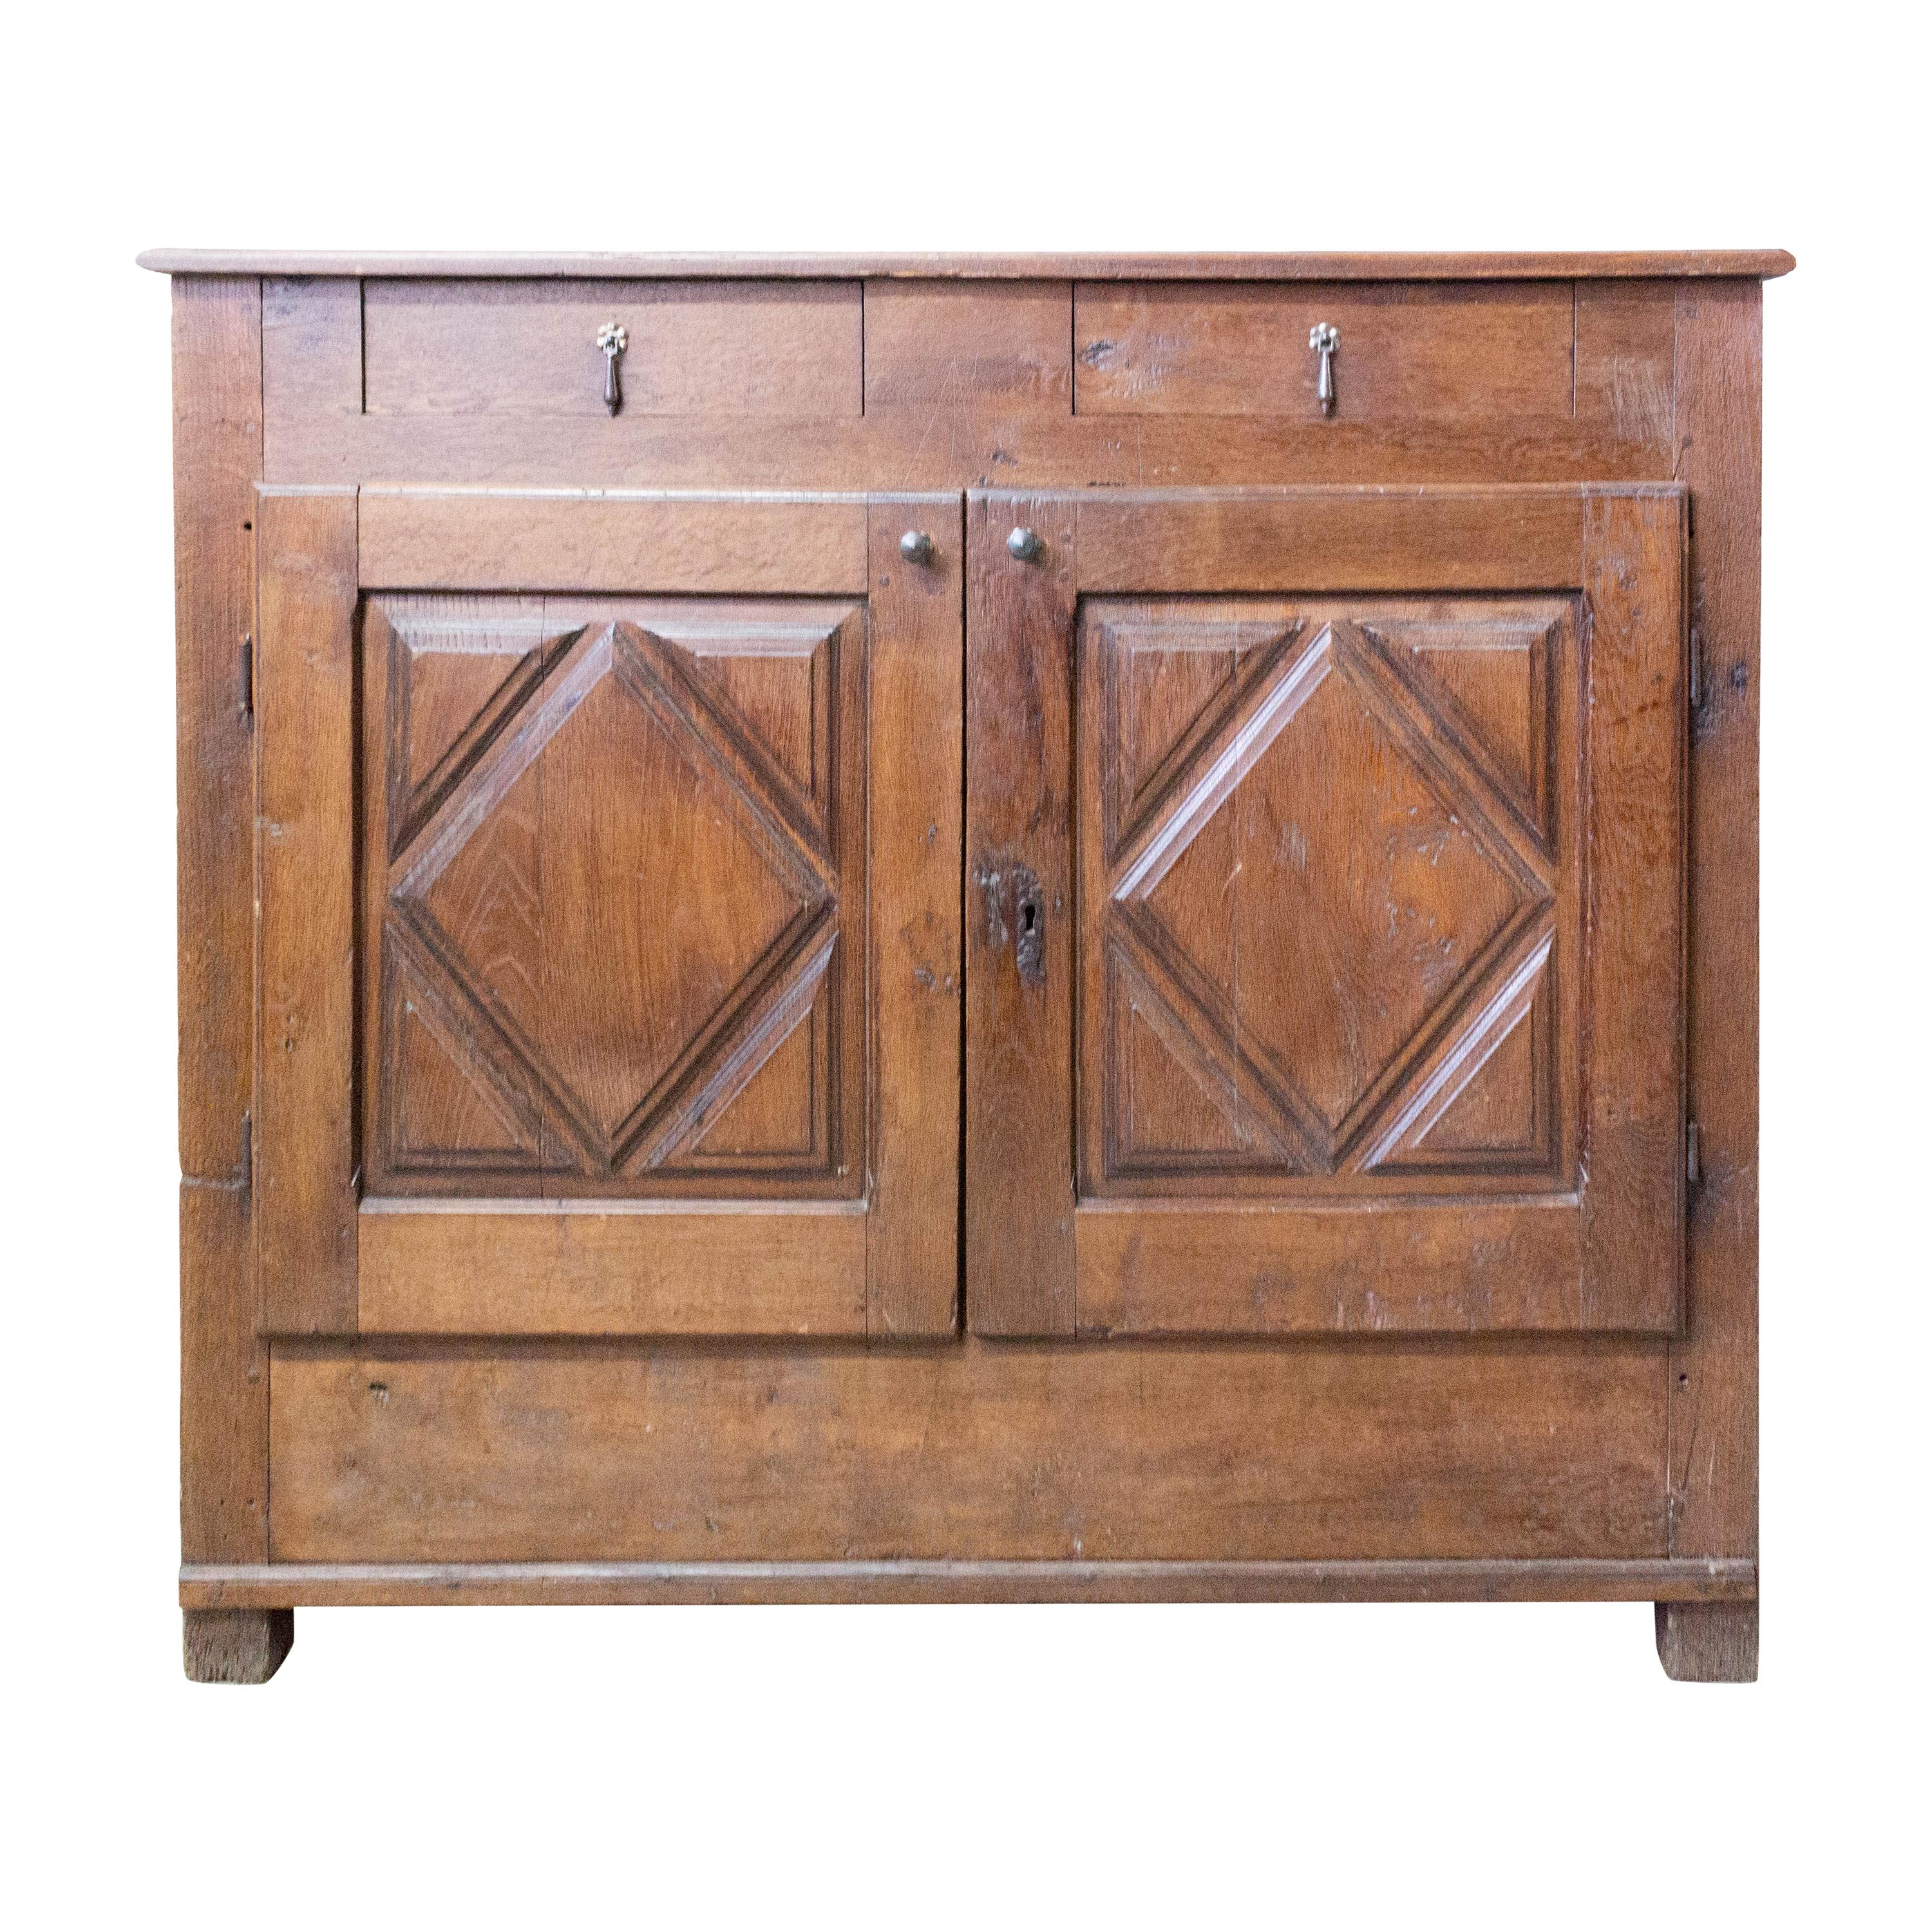 Credenza Sideboard French Buffet Diamond Doors, Late 19th Century